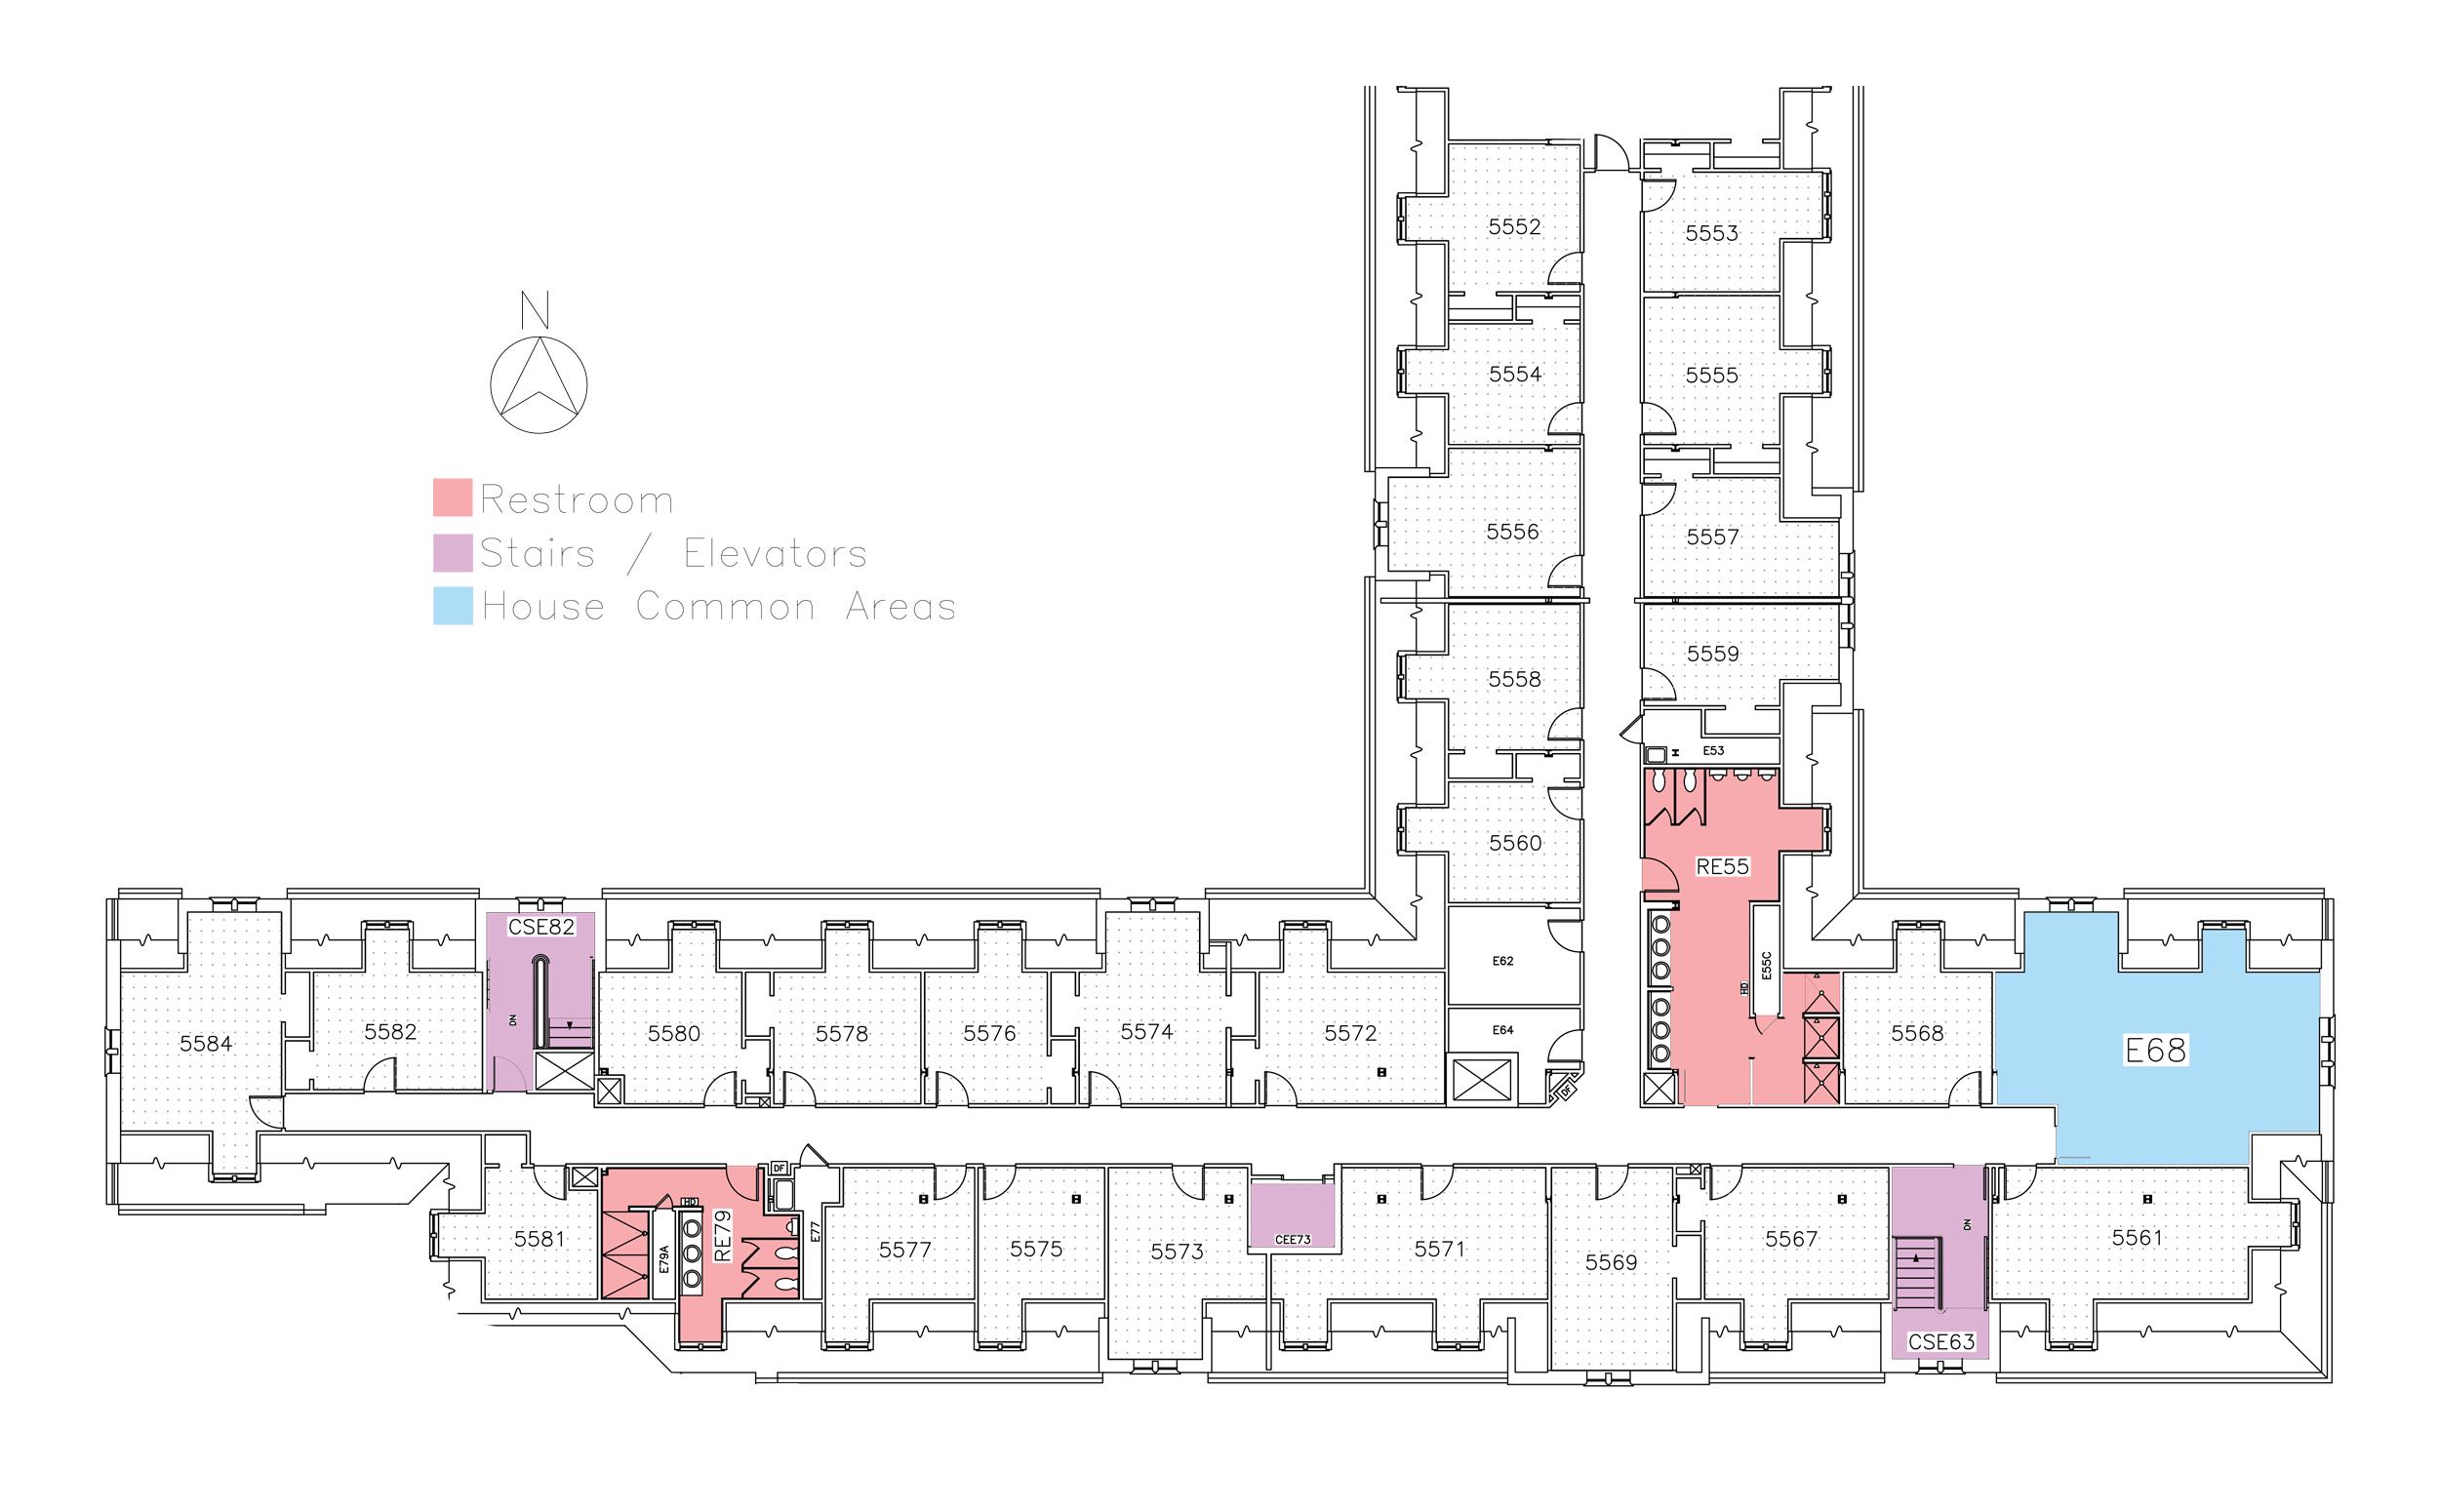 Bennett House, fifth floor in Friley Hall floor plan. Identifies the location of rooms, bathrooms and common space.